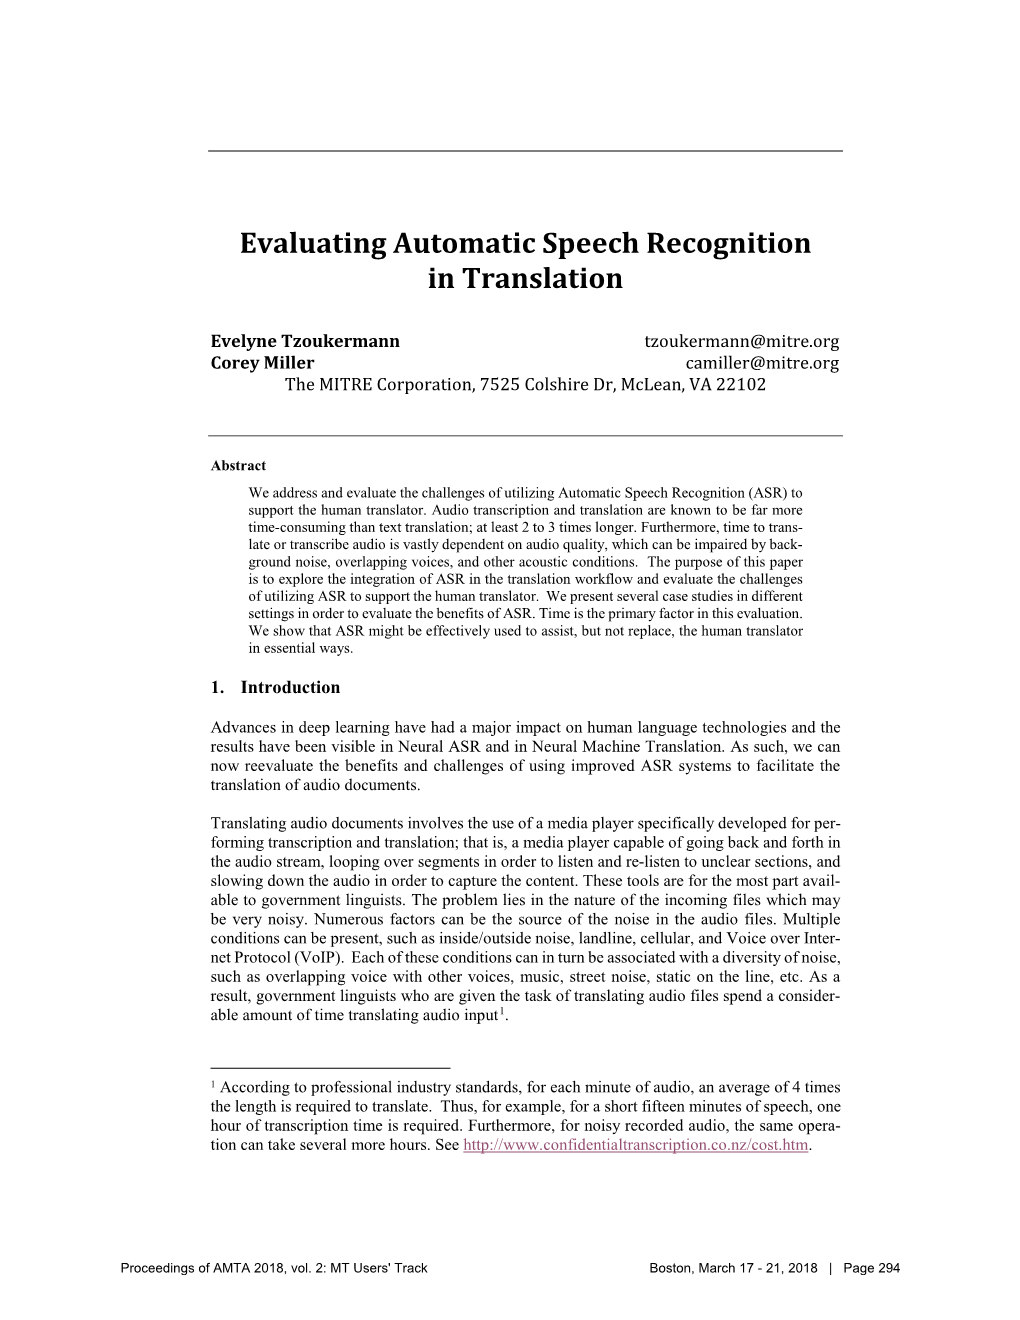 Evaluating Automatic Speech Recognition in Translation